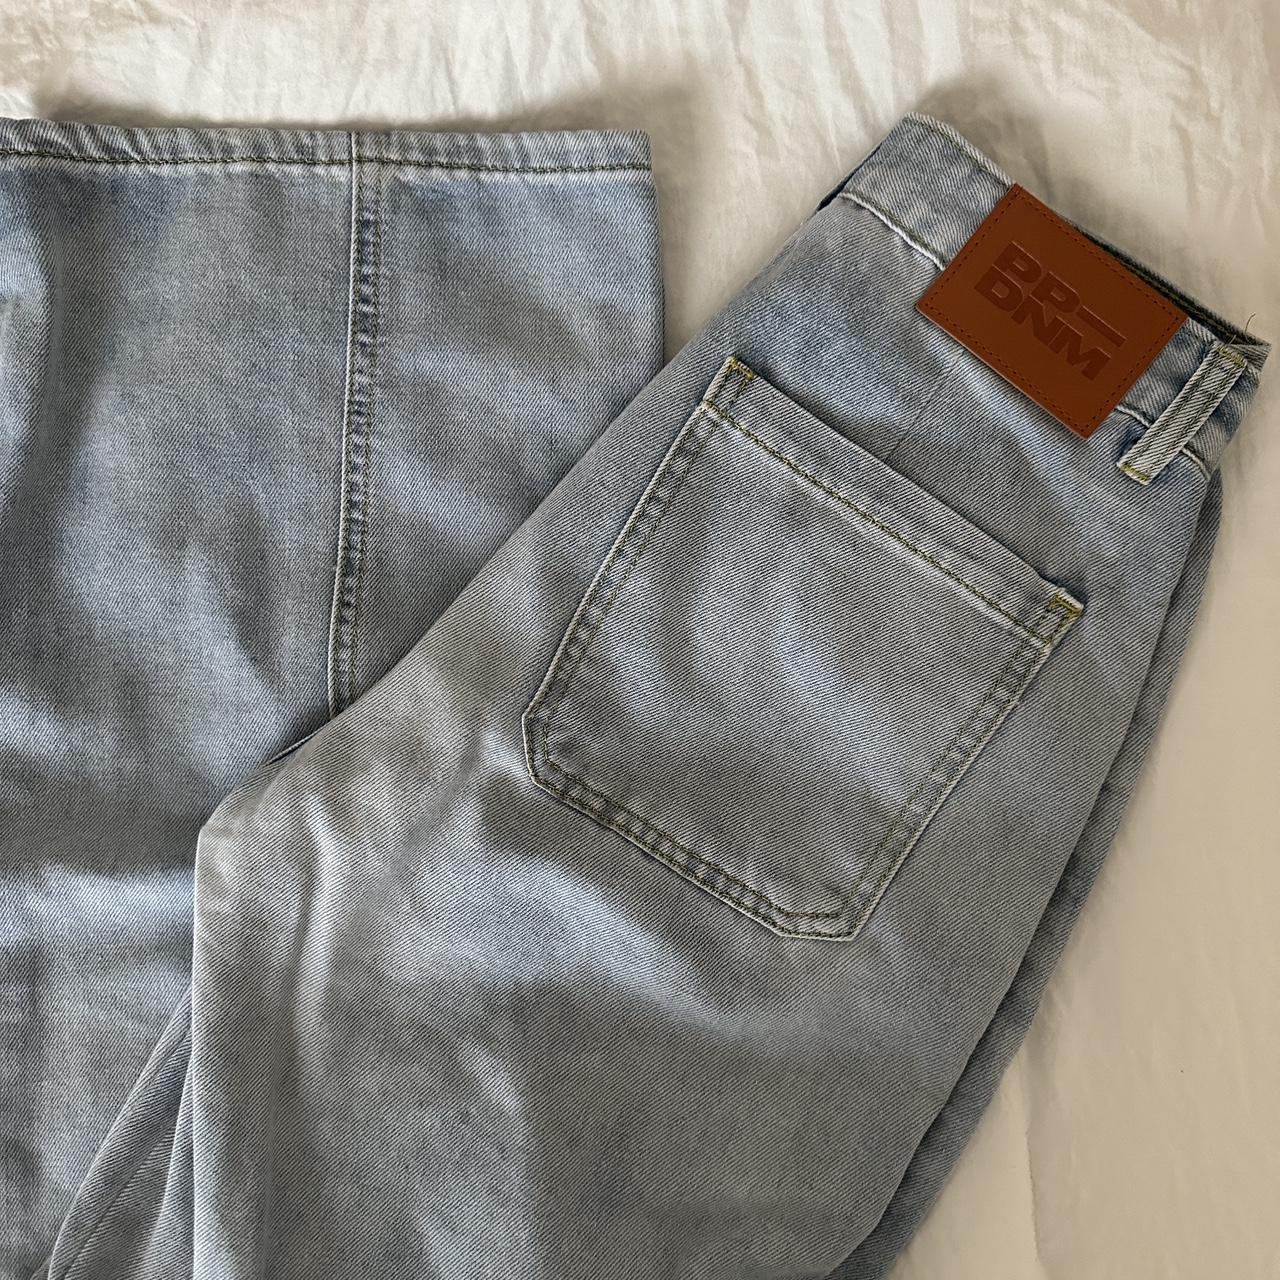 Princess Polly cargo jeans Size US 2 Feel free to... - Depop